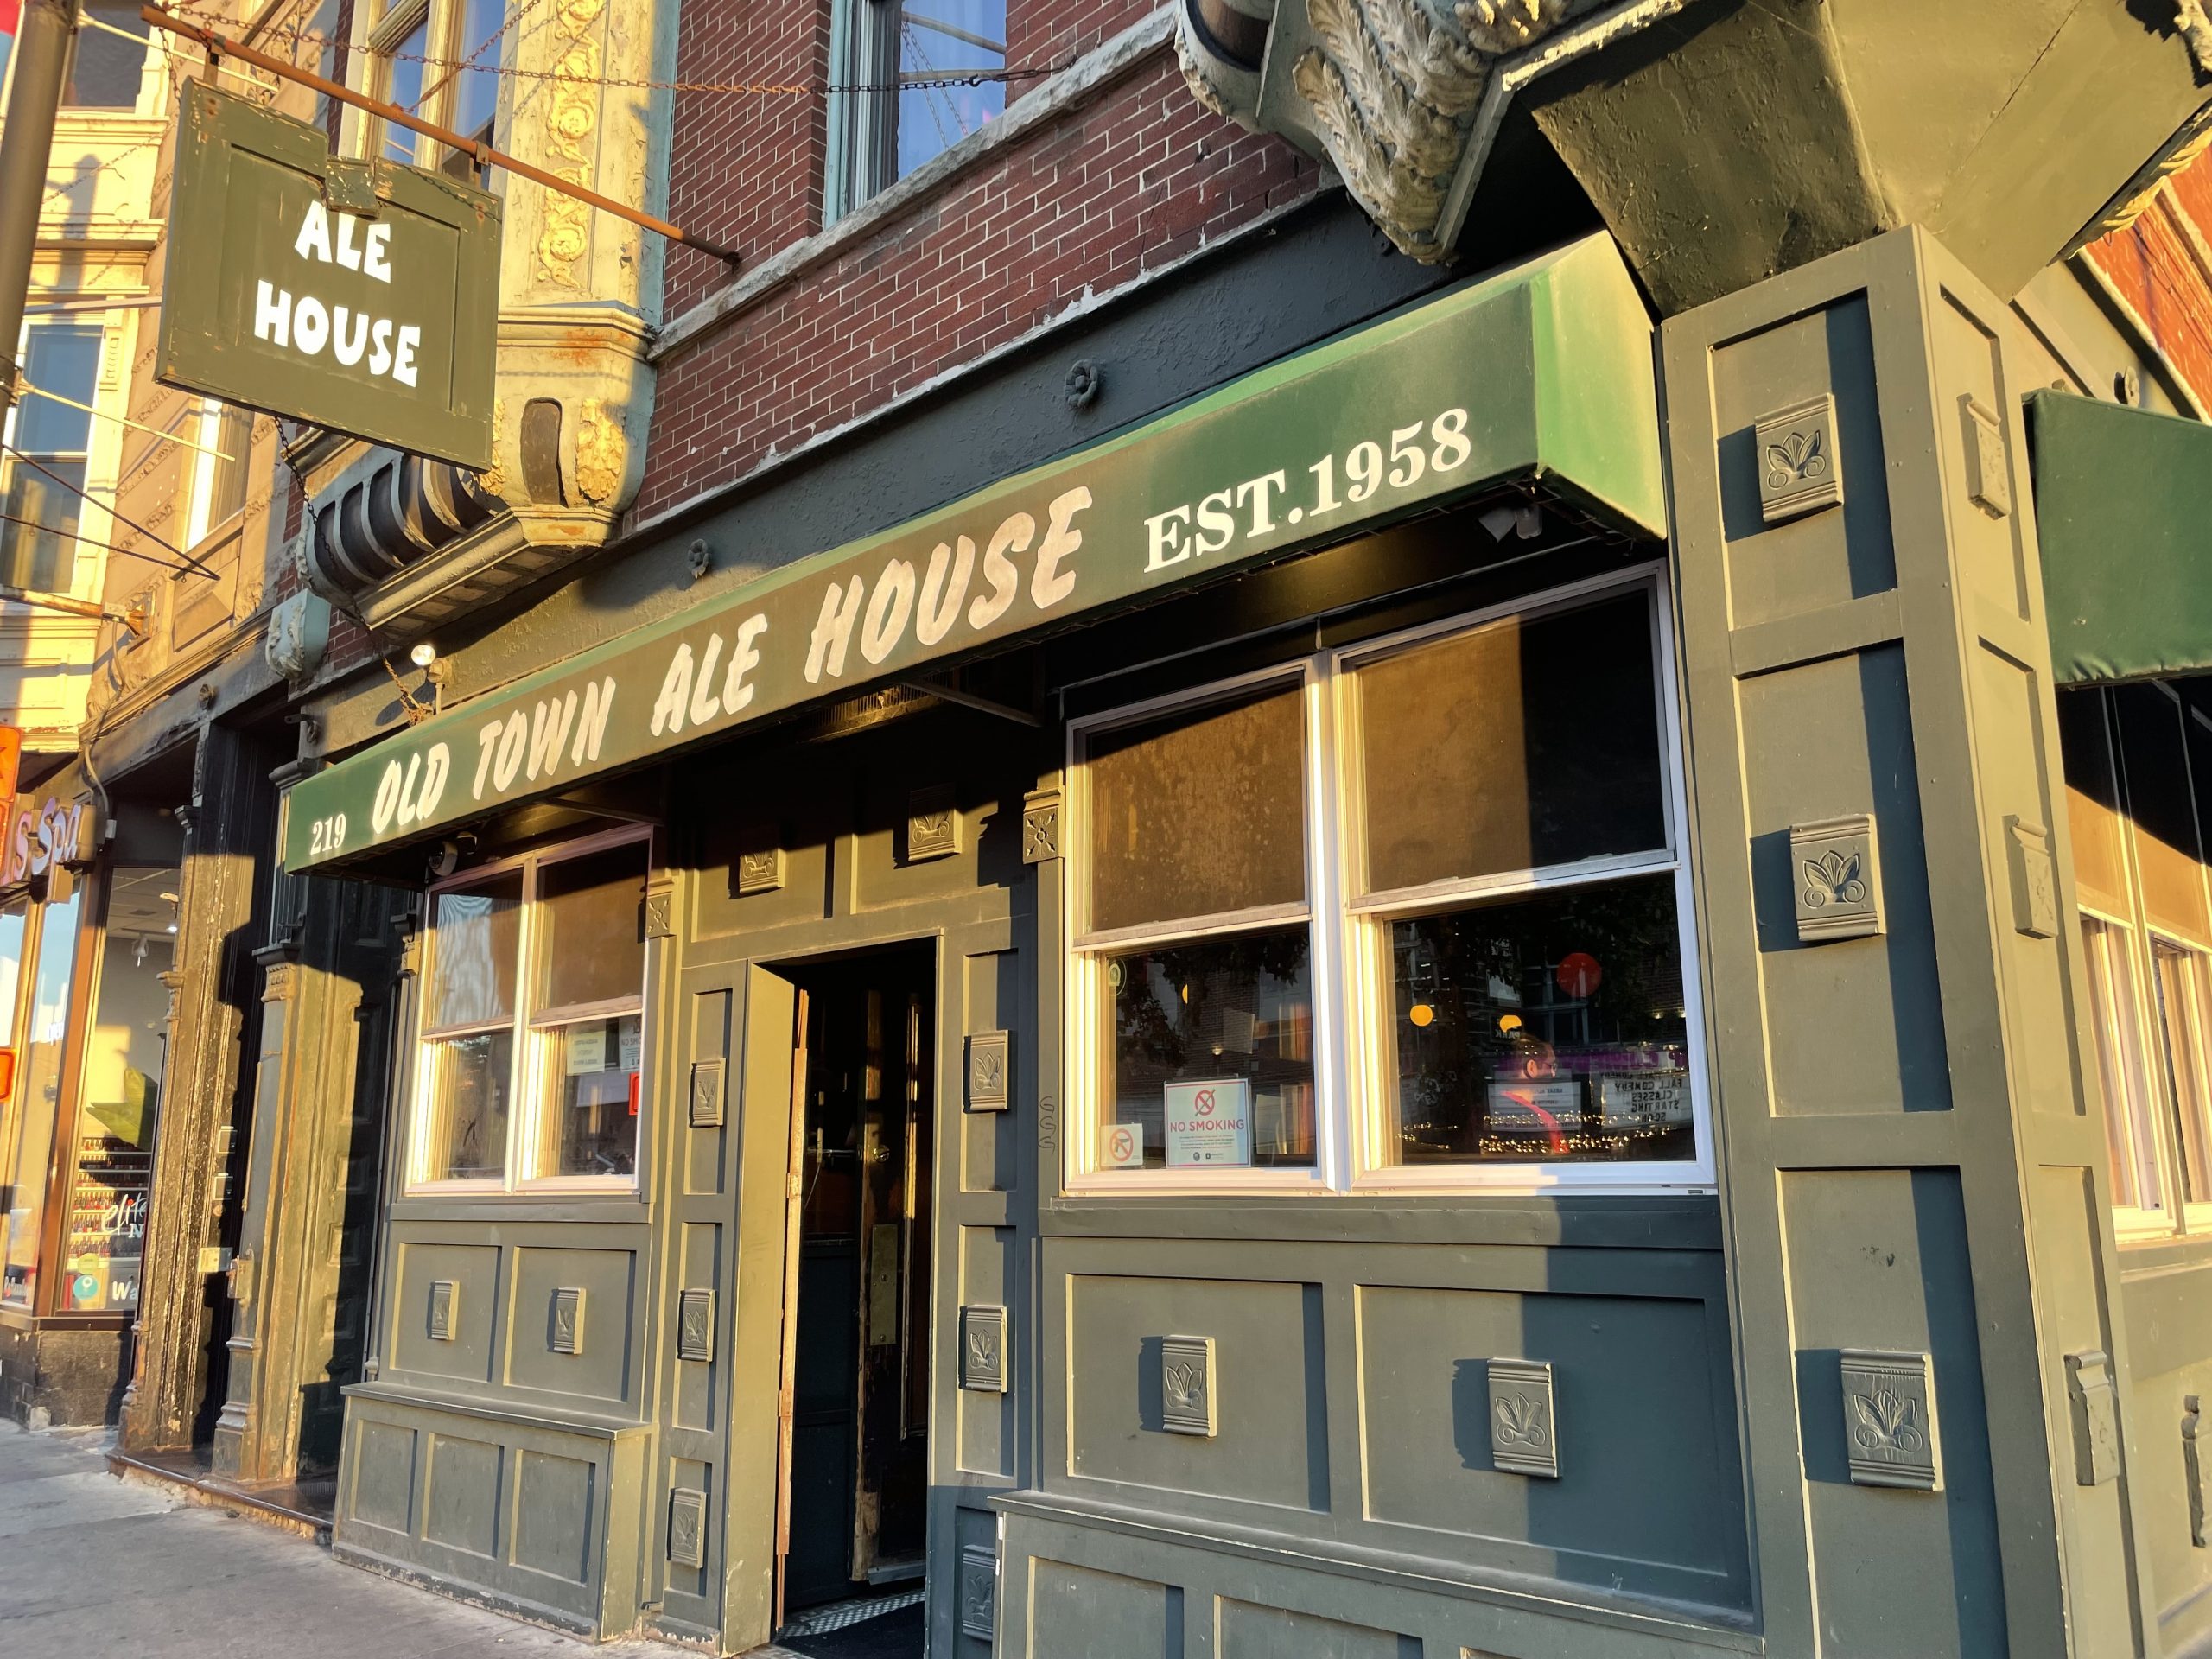 Old Town Ale House - Chicago Dive Bar - Exterior